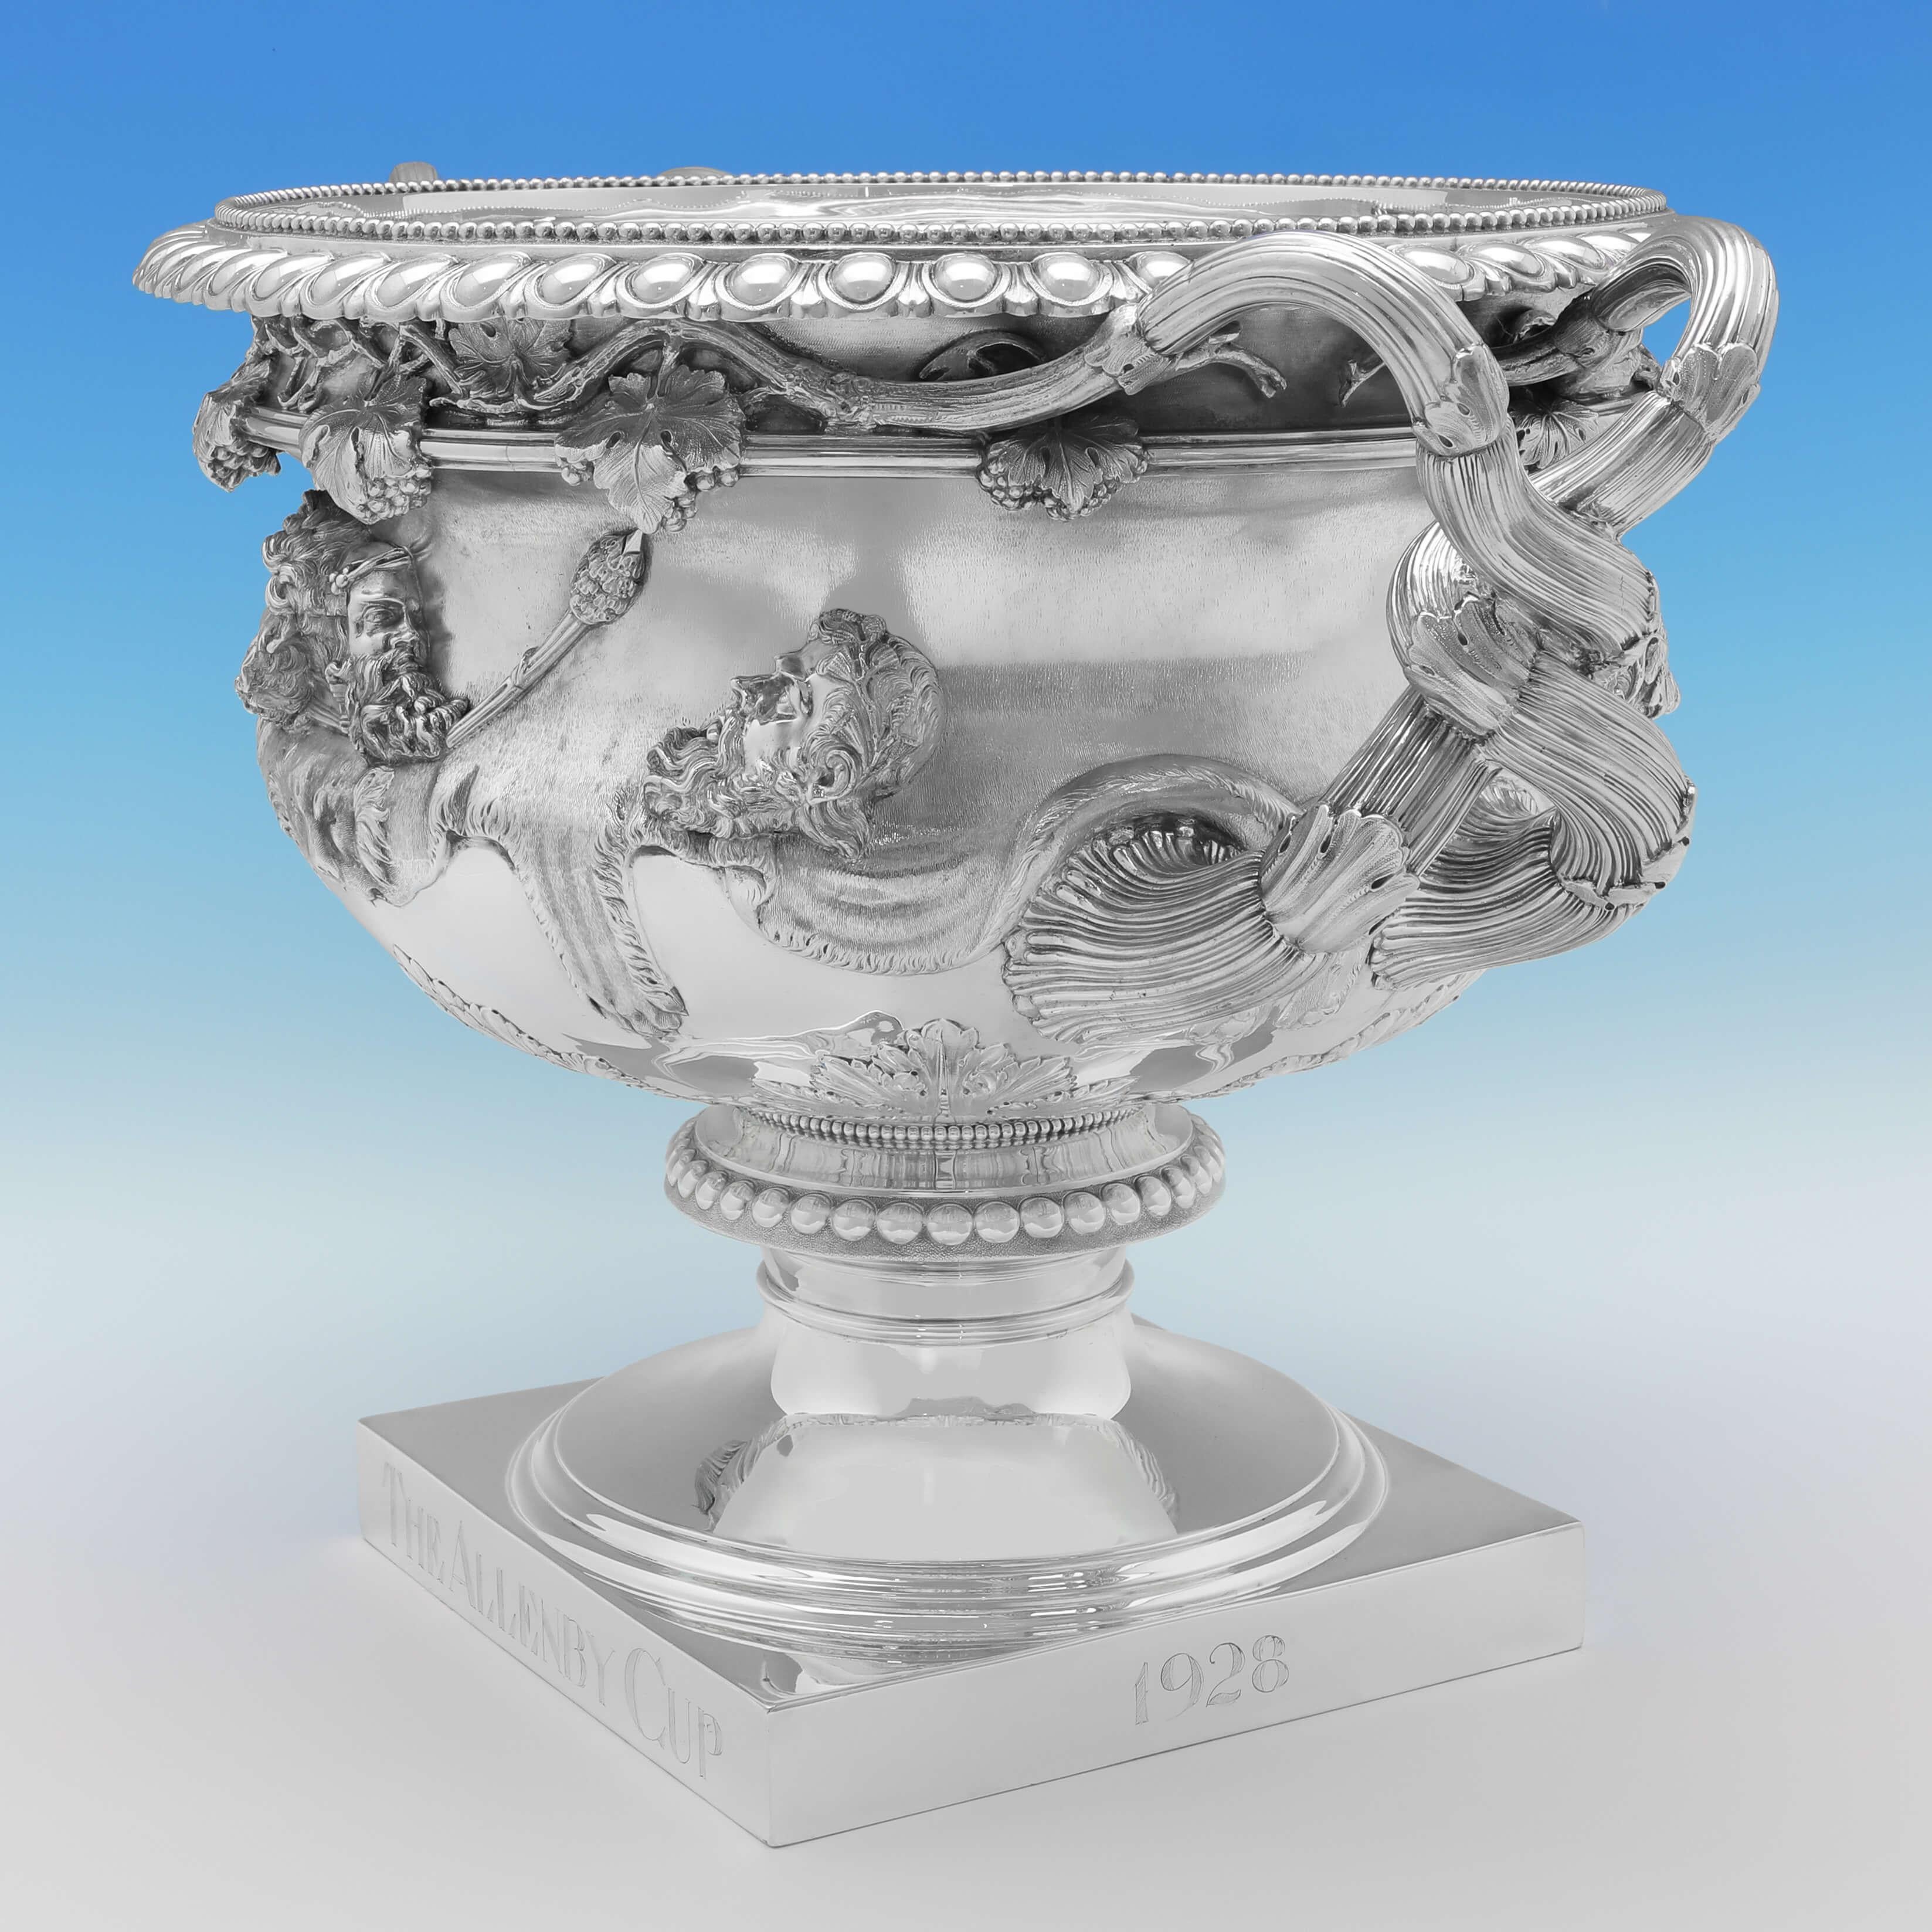 Hallmarked in London in 1906 by Barnards, this monumental, Edwardian, antique sterling silver Warwick vase, is exceptionally large and heavy, and wonderfully made. The base is engraved to one side with 'The Allenby Cup', and to another 'Heliopolis'